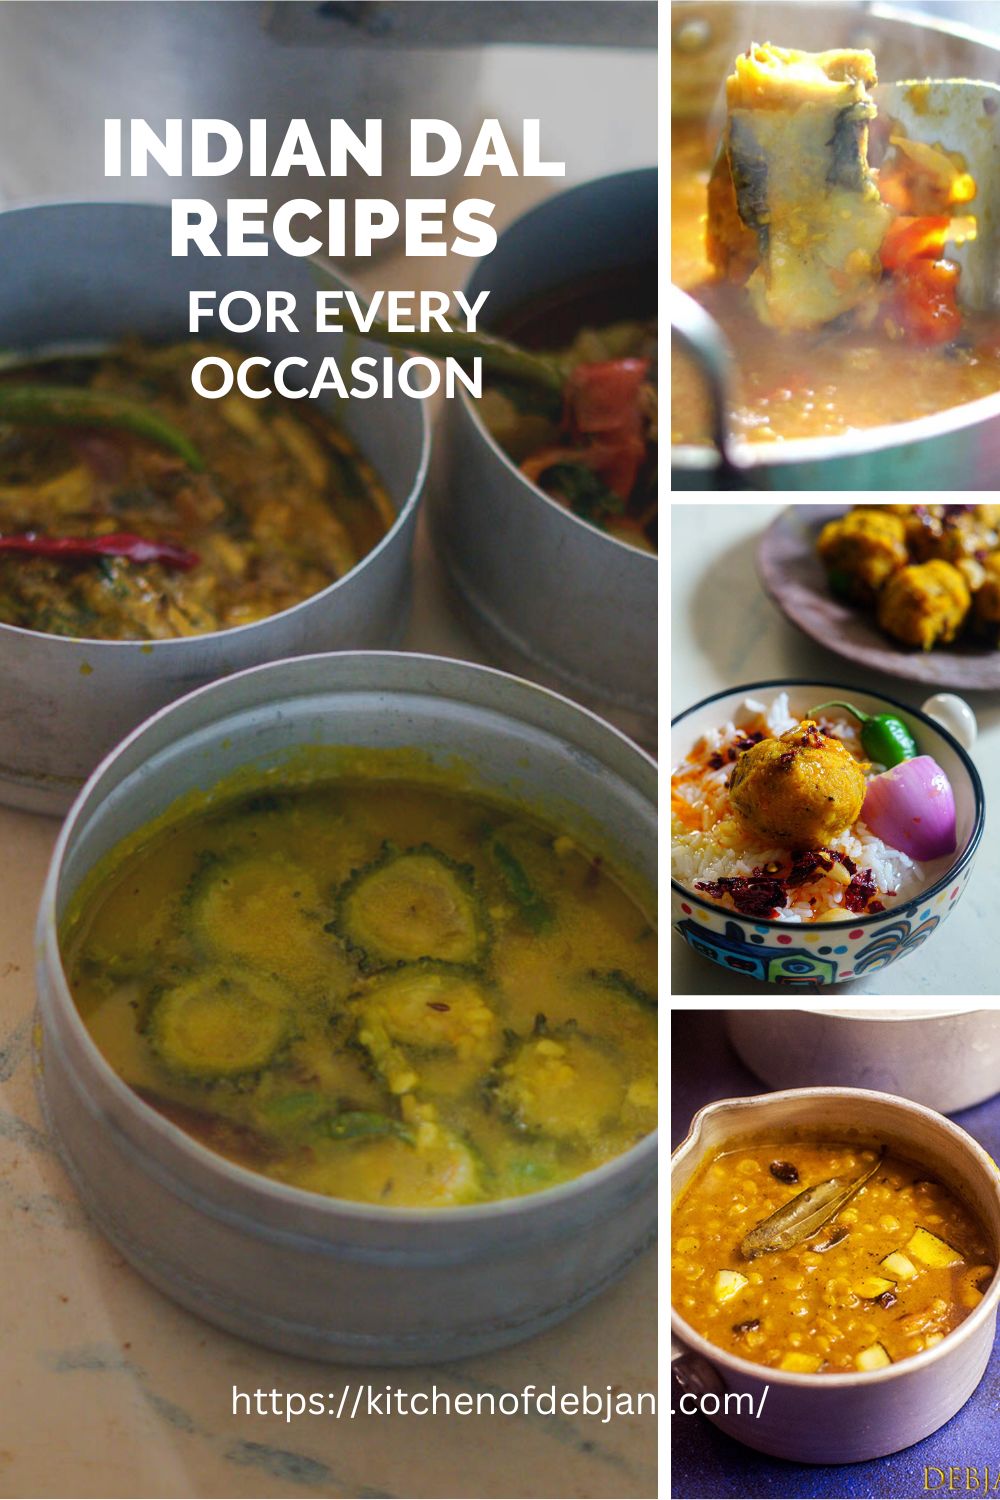 %Indian Dal Recipes for eavery occation Pinterest Graphic